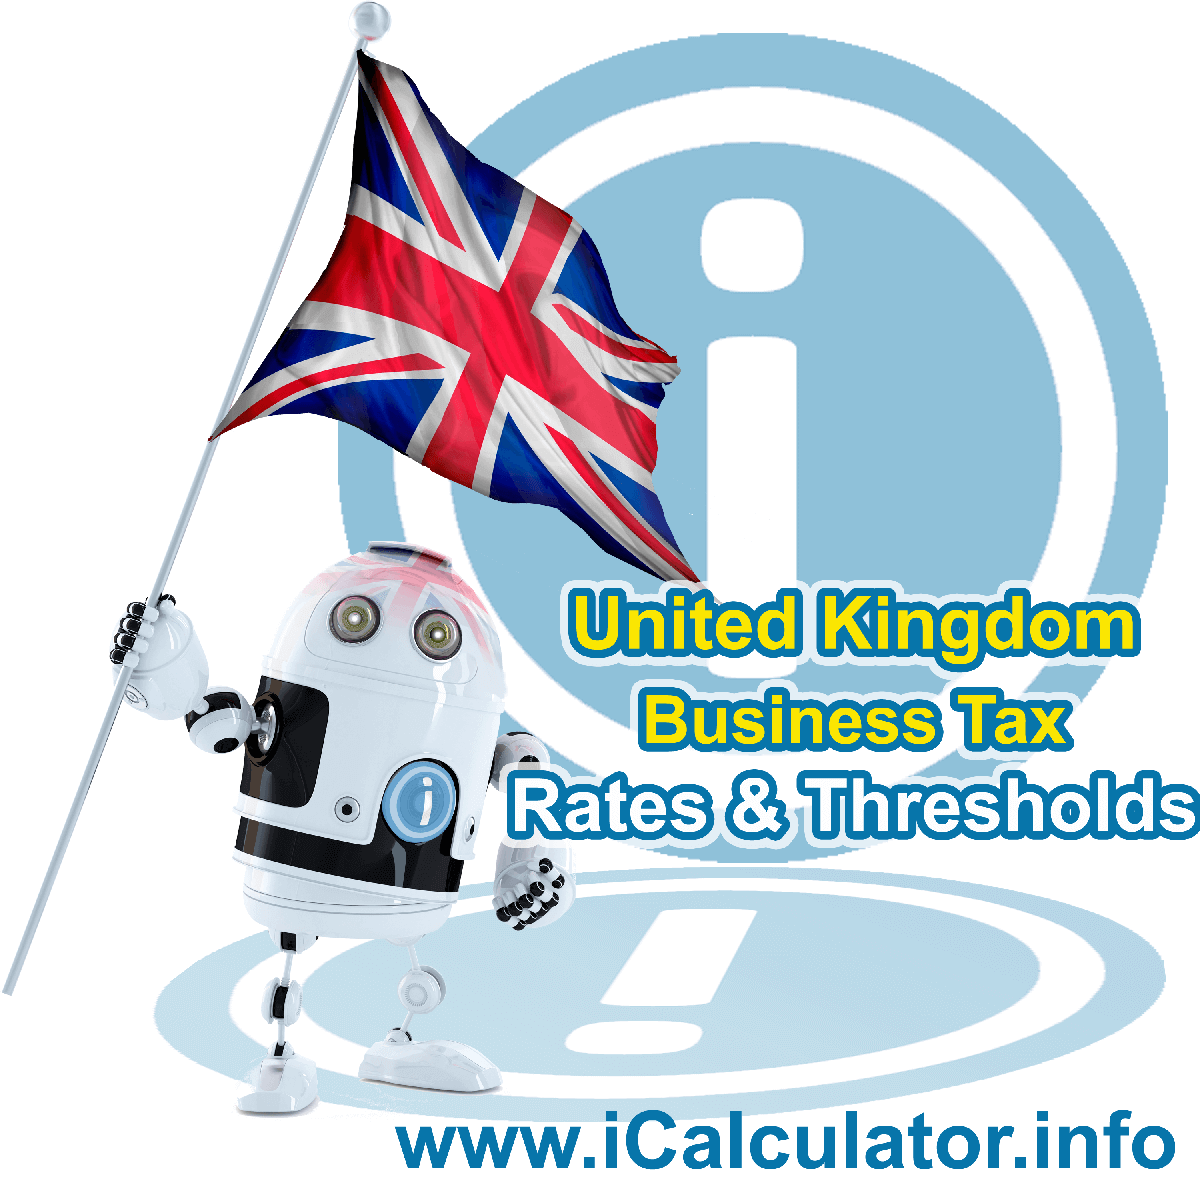 United Kingdom Corporation Tax Rates in 2014. This image shows the United Kingdom flag and information relating to the corporation tax formula for the United Kingdom Corporation Tax Calculator in 2014